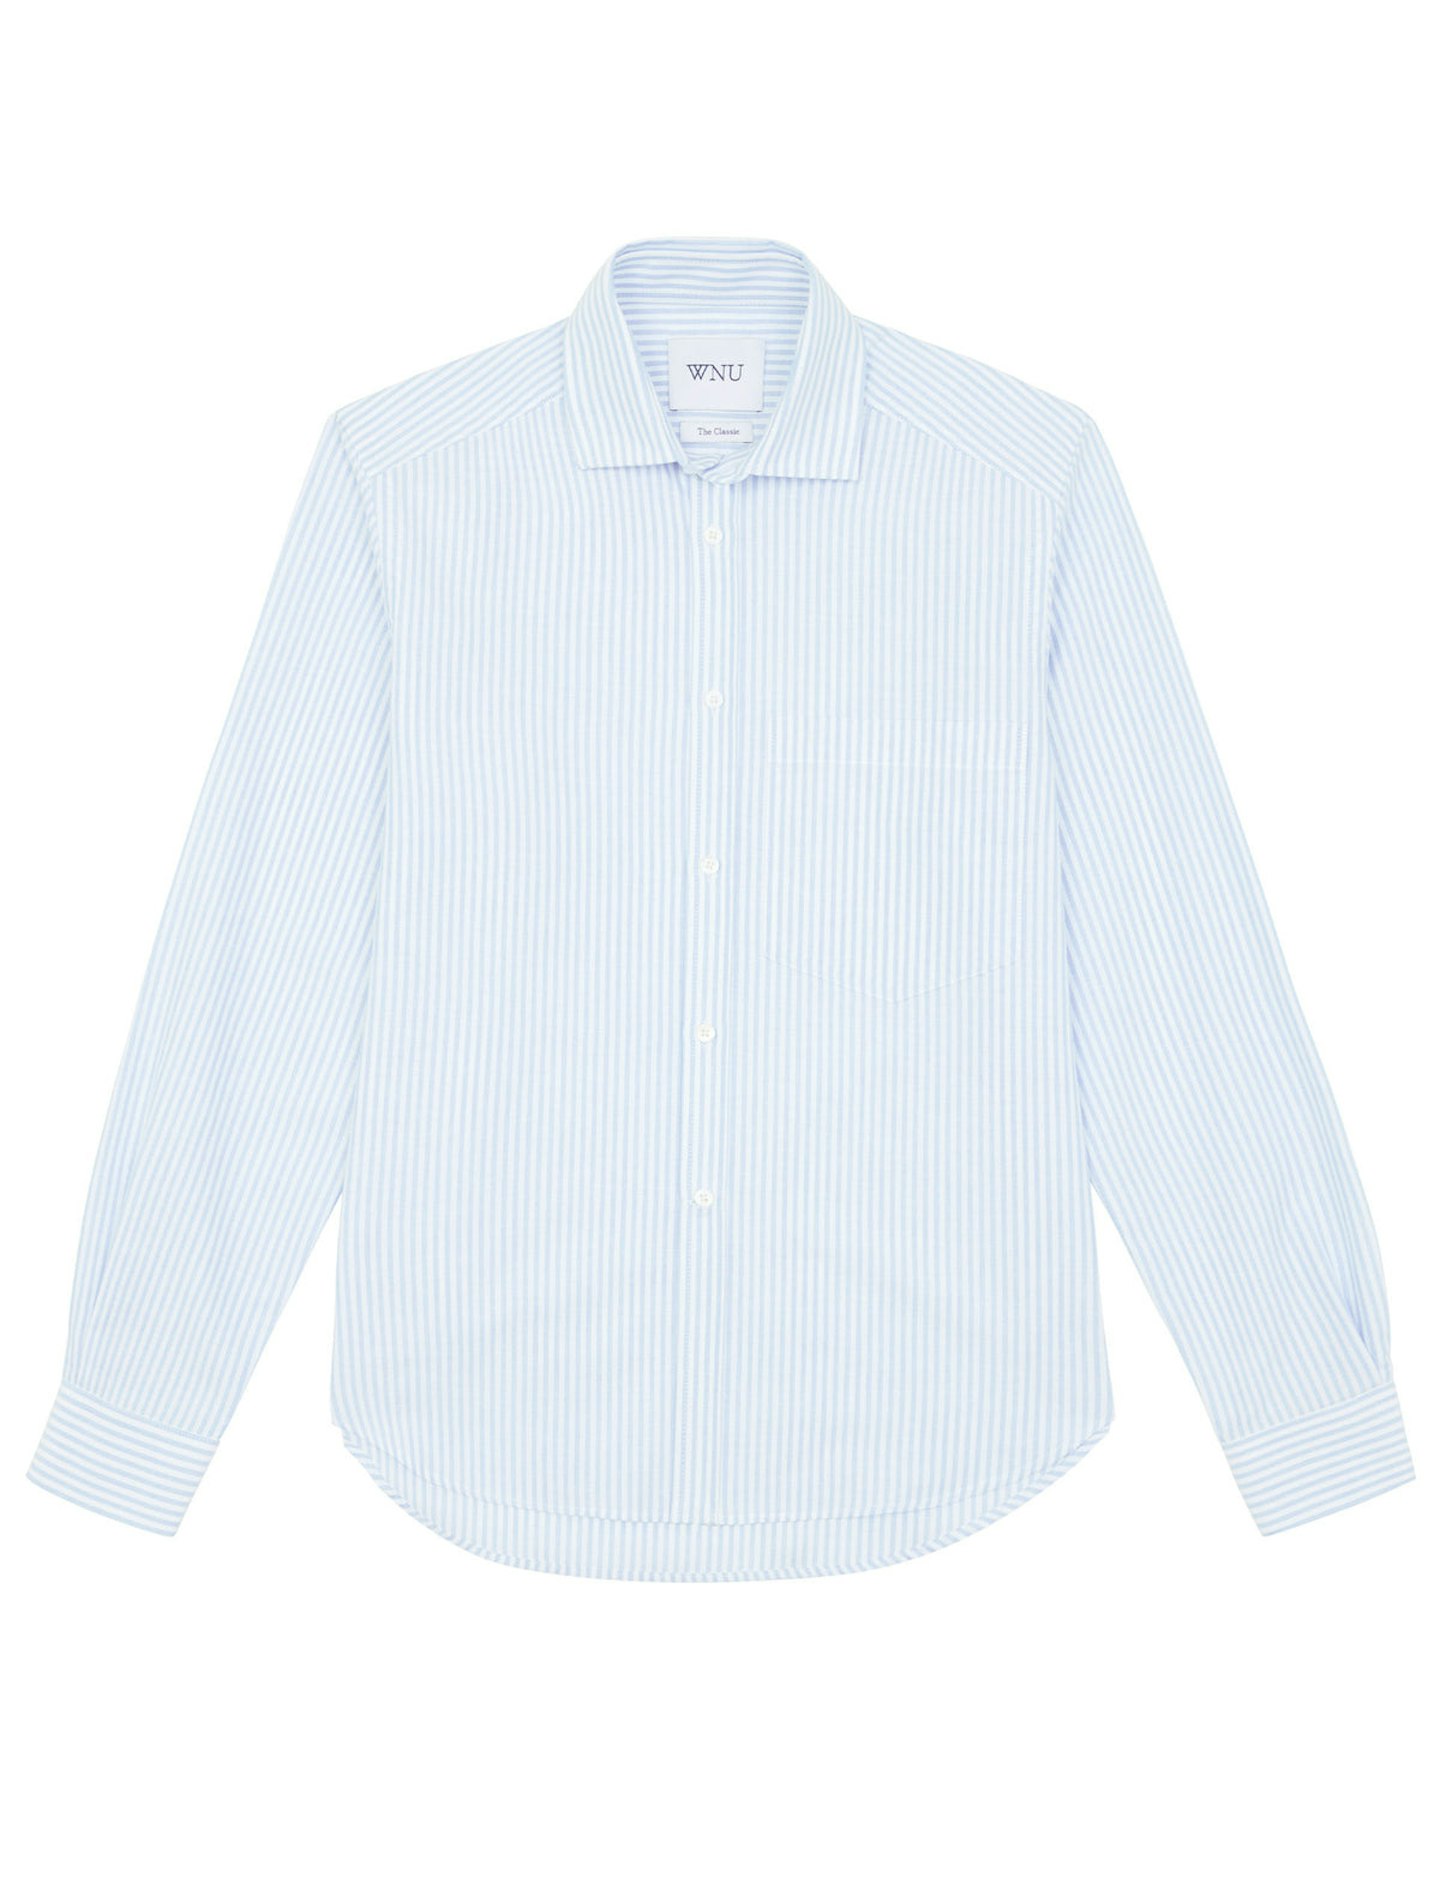 With Nothing Underneath, Oxford Celeste Blue Stripe Shirt